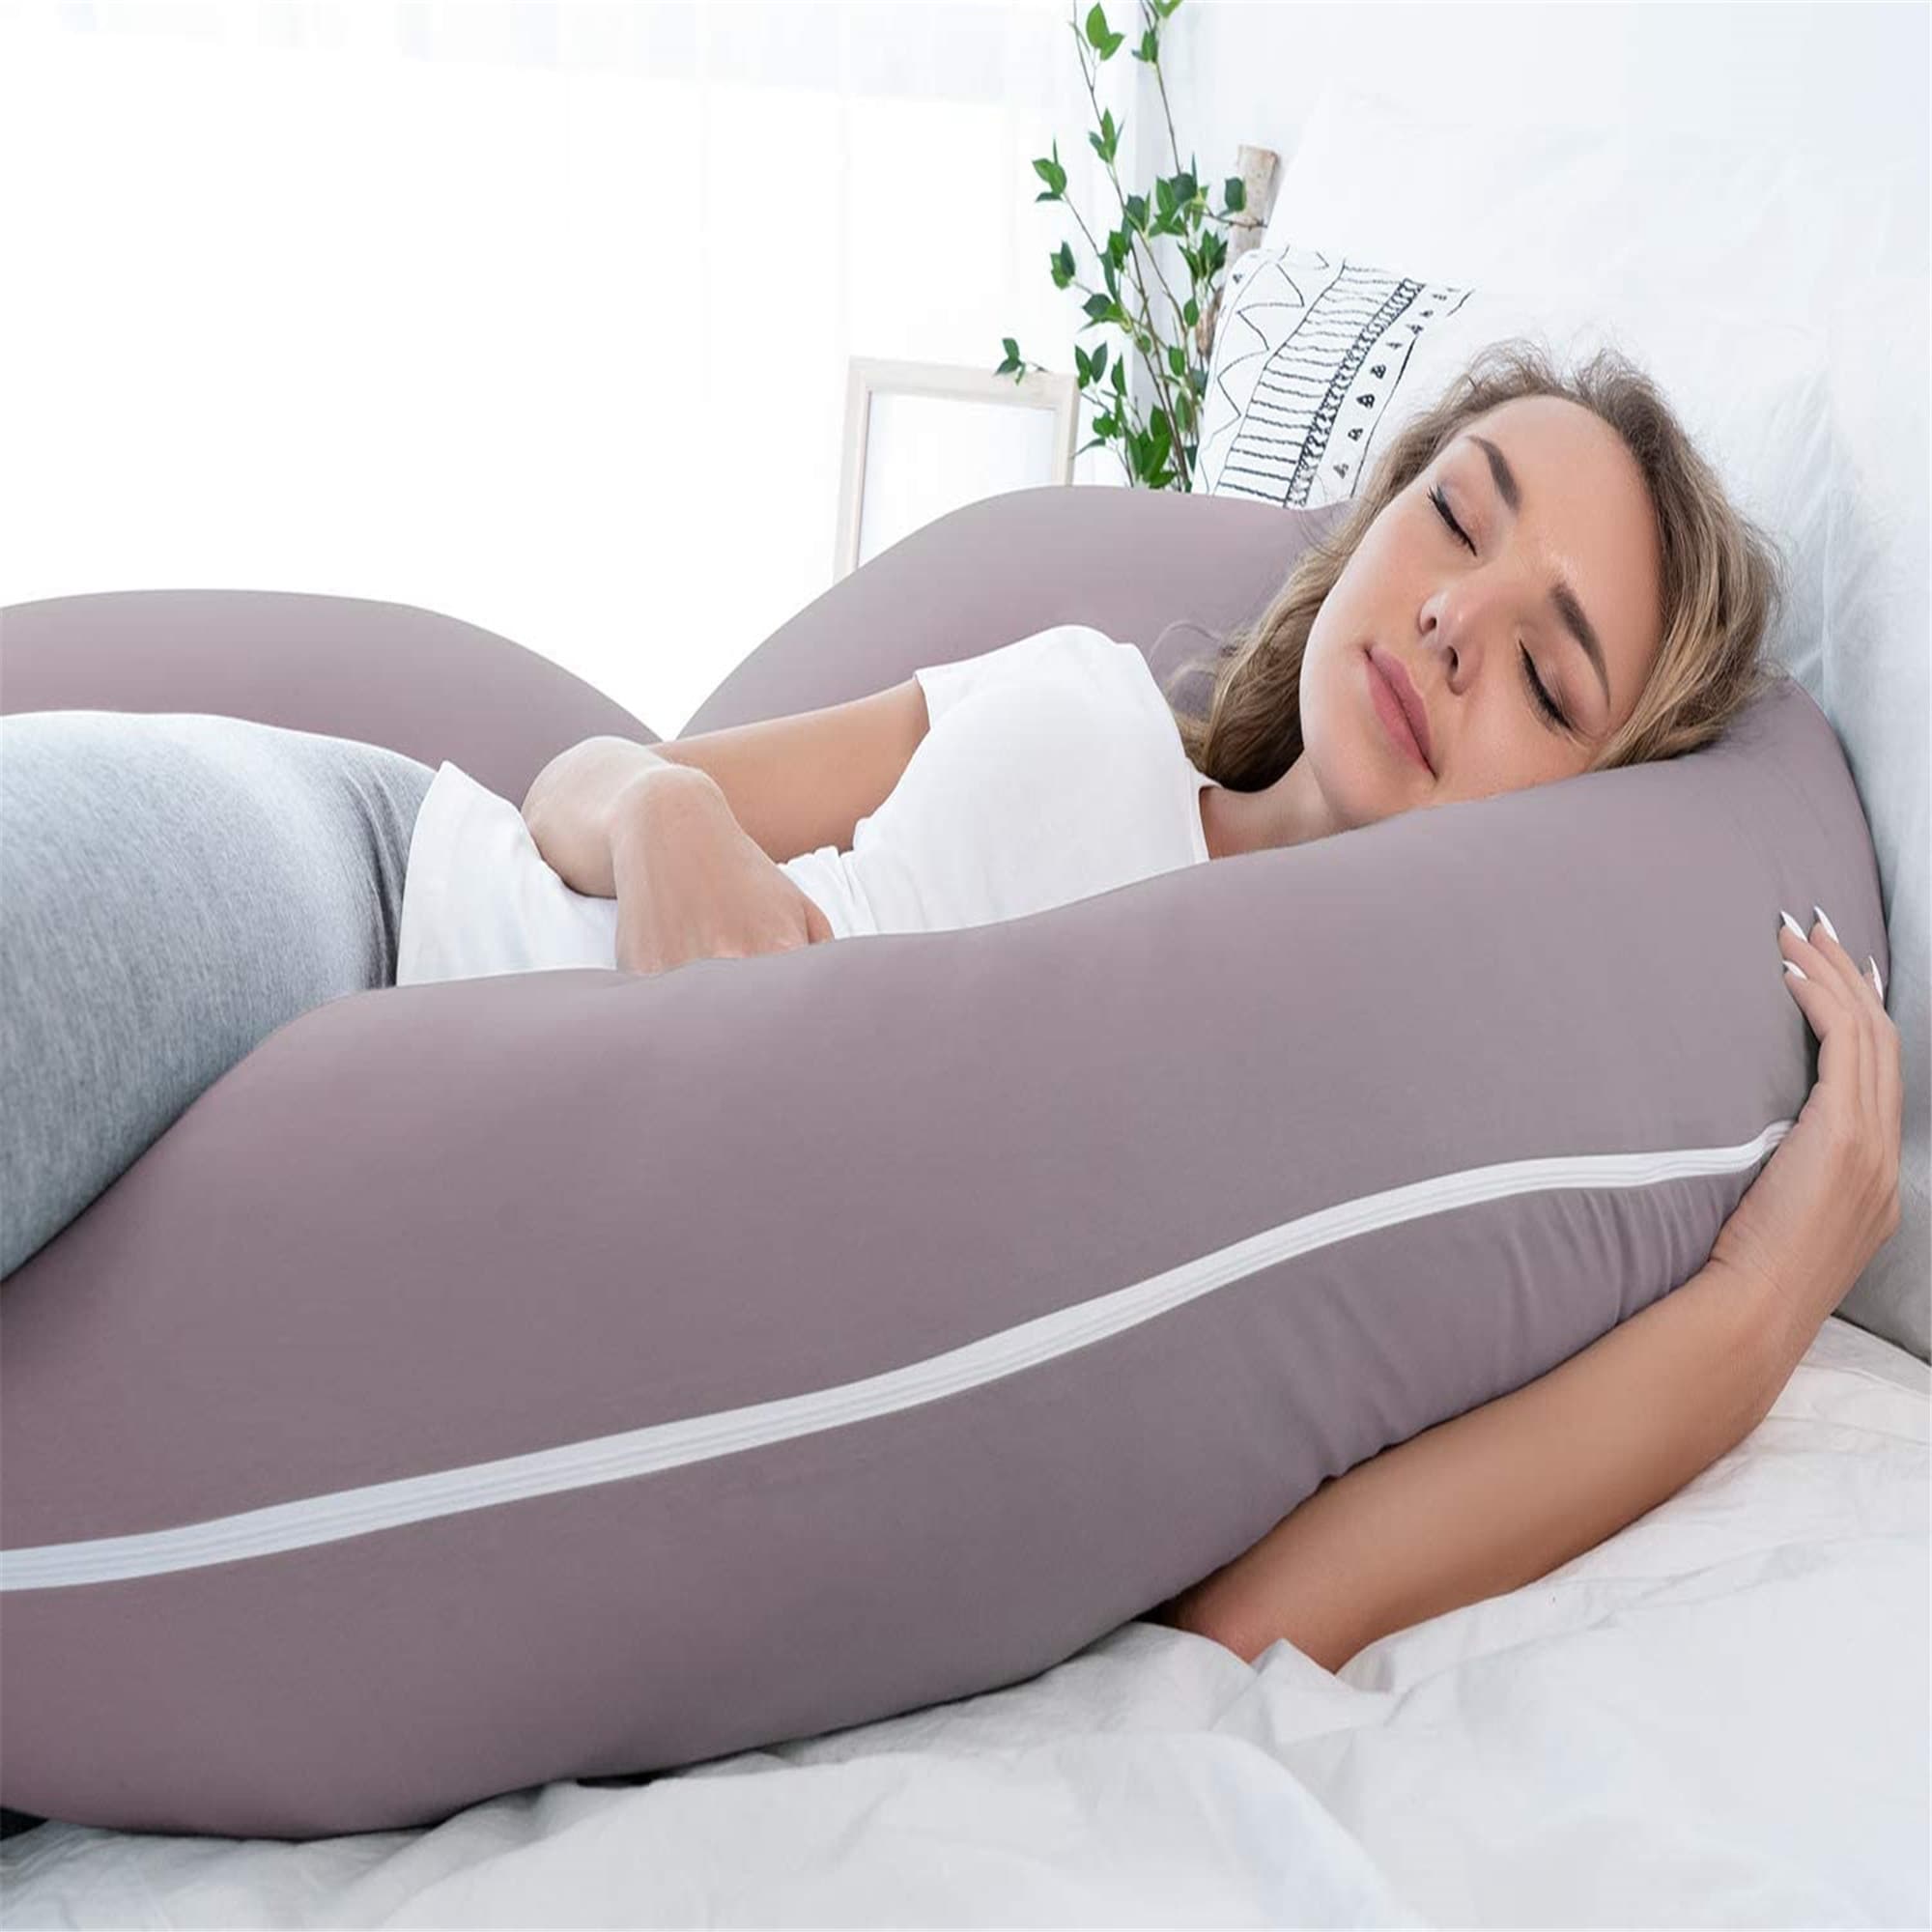 https://ak1.ostkcdn.com/images/products/is/images/direct/548bd5f3f0822d9ed74e98edfafd37b48fb9fd33/Pregnancy-Pillow%2CMaternity-Body-Pillow-for-Pregnant-Women%2CC-Shaped-Full-Body-Pillow-with-Zippers-Jersey-Cover.jpg